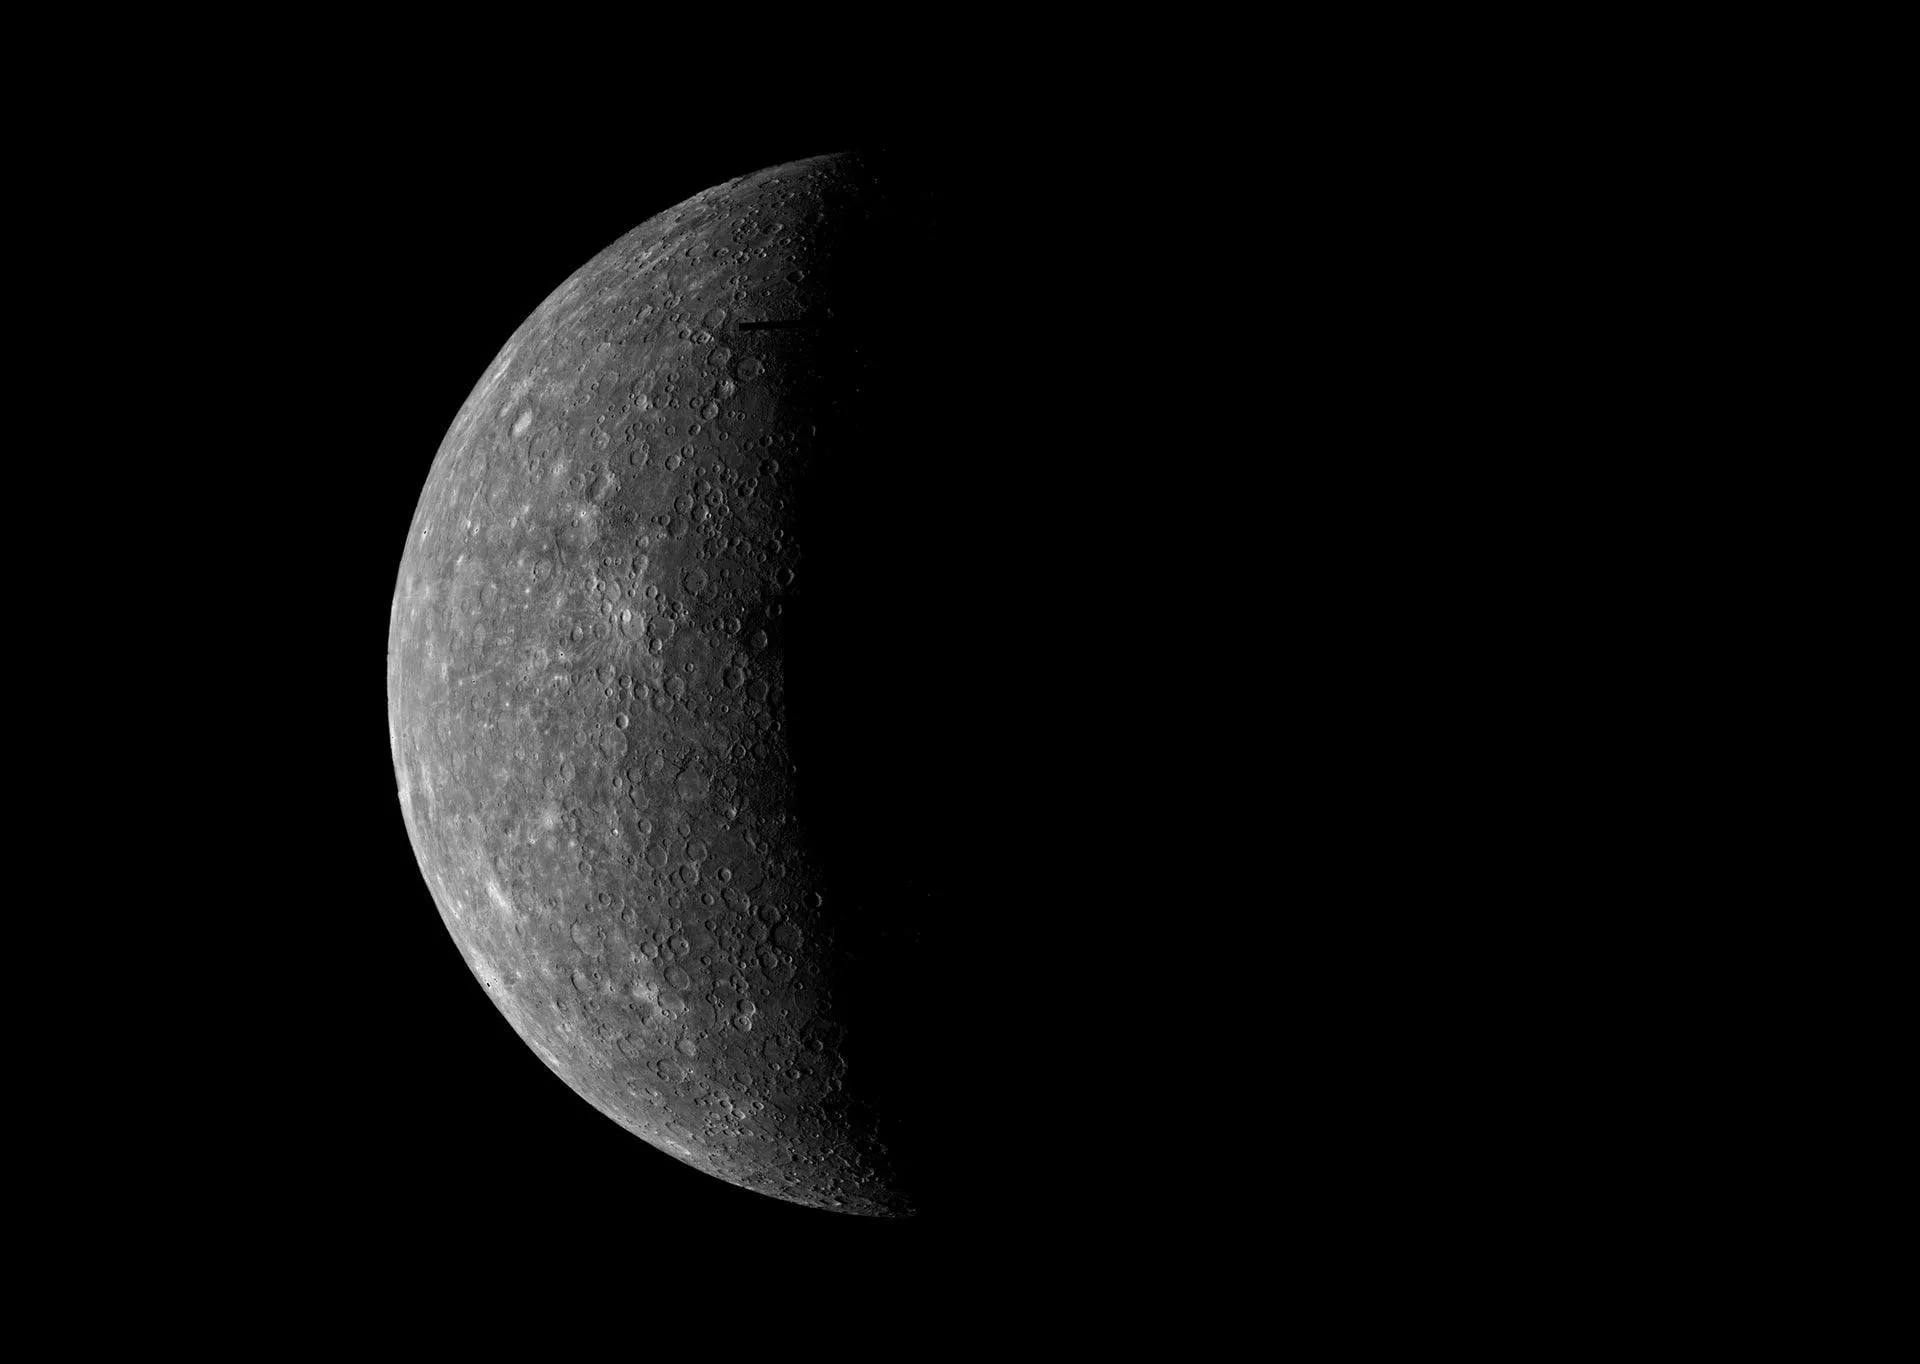 Mercury is a planet that has a very small tilt to its axis, rotating almost vertically!